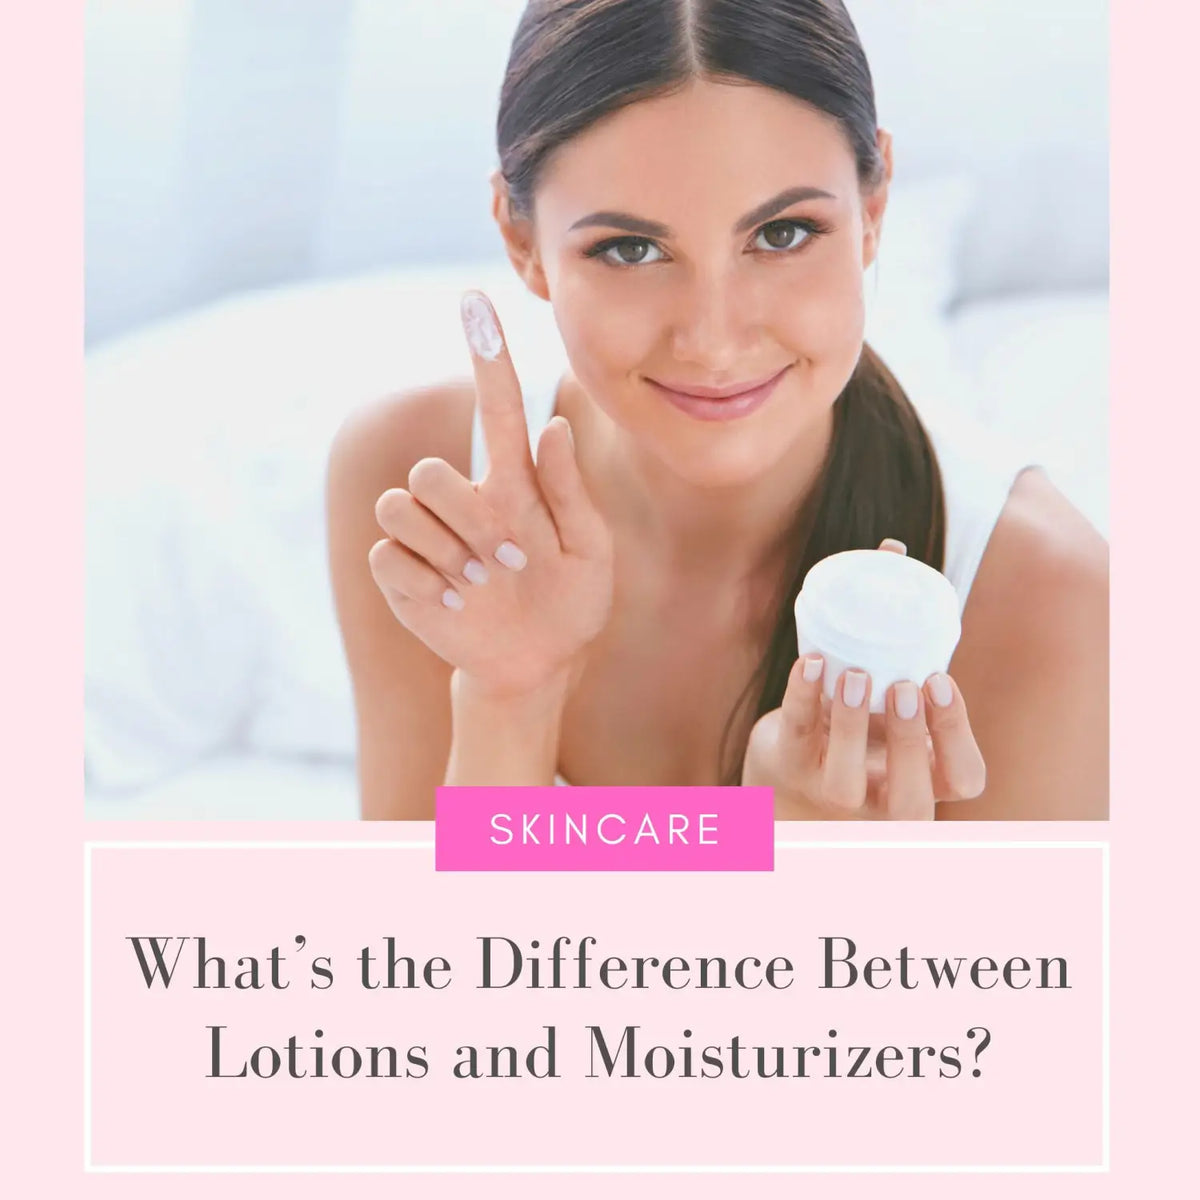 What is the difference between lotions and moisturizers? – Dermishop